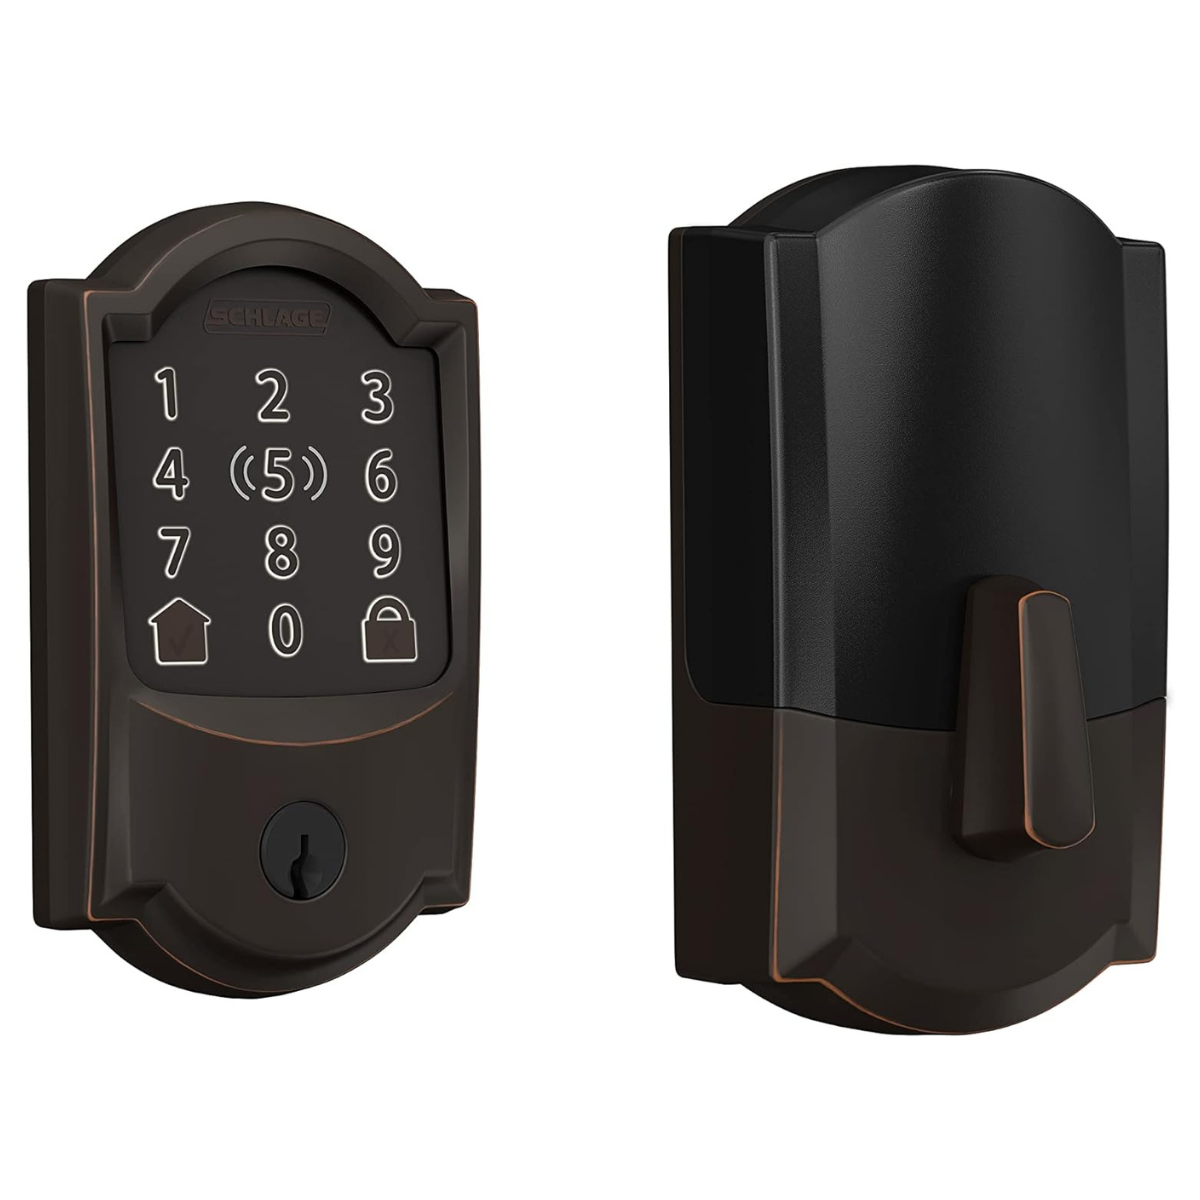 The Schlage Encode Plus, keypad and lock side by side